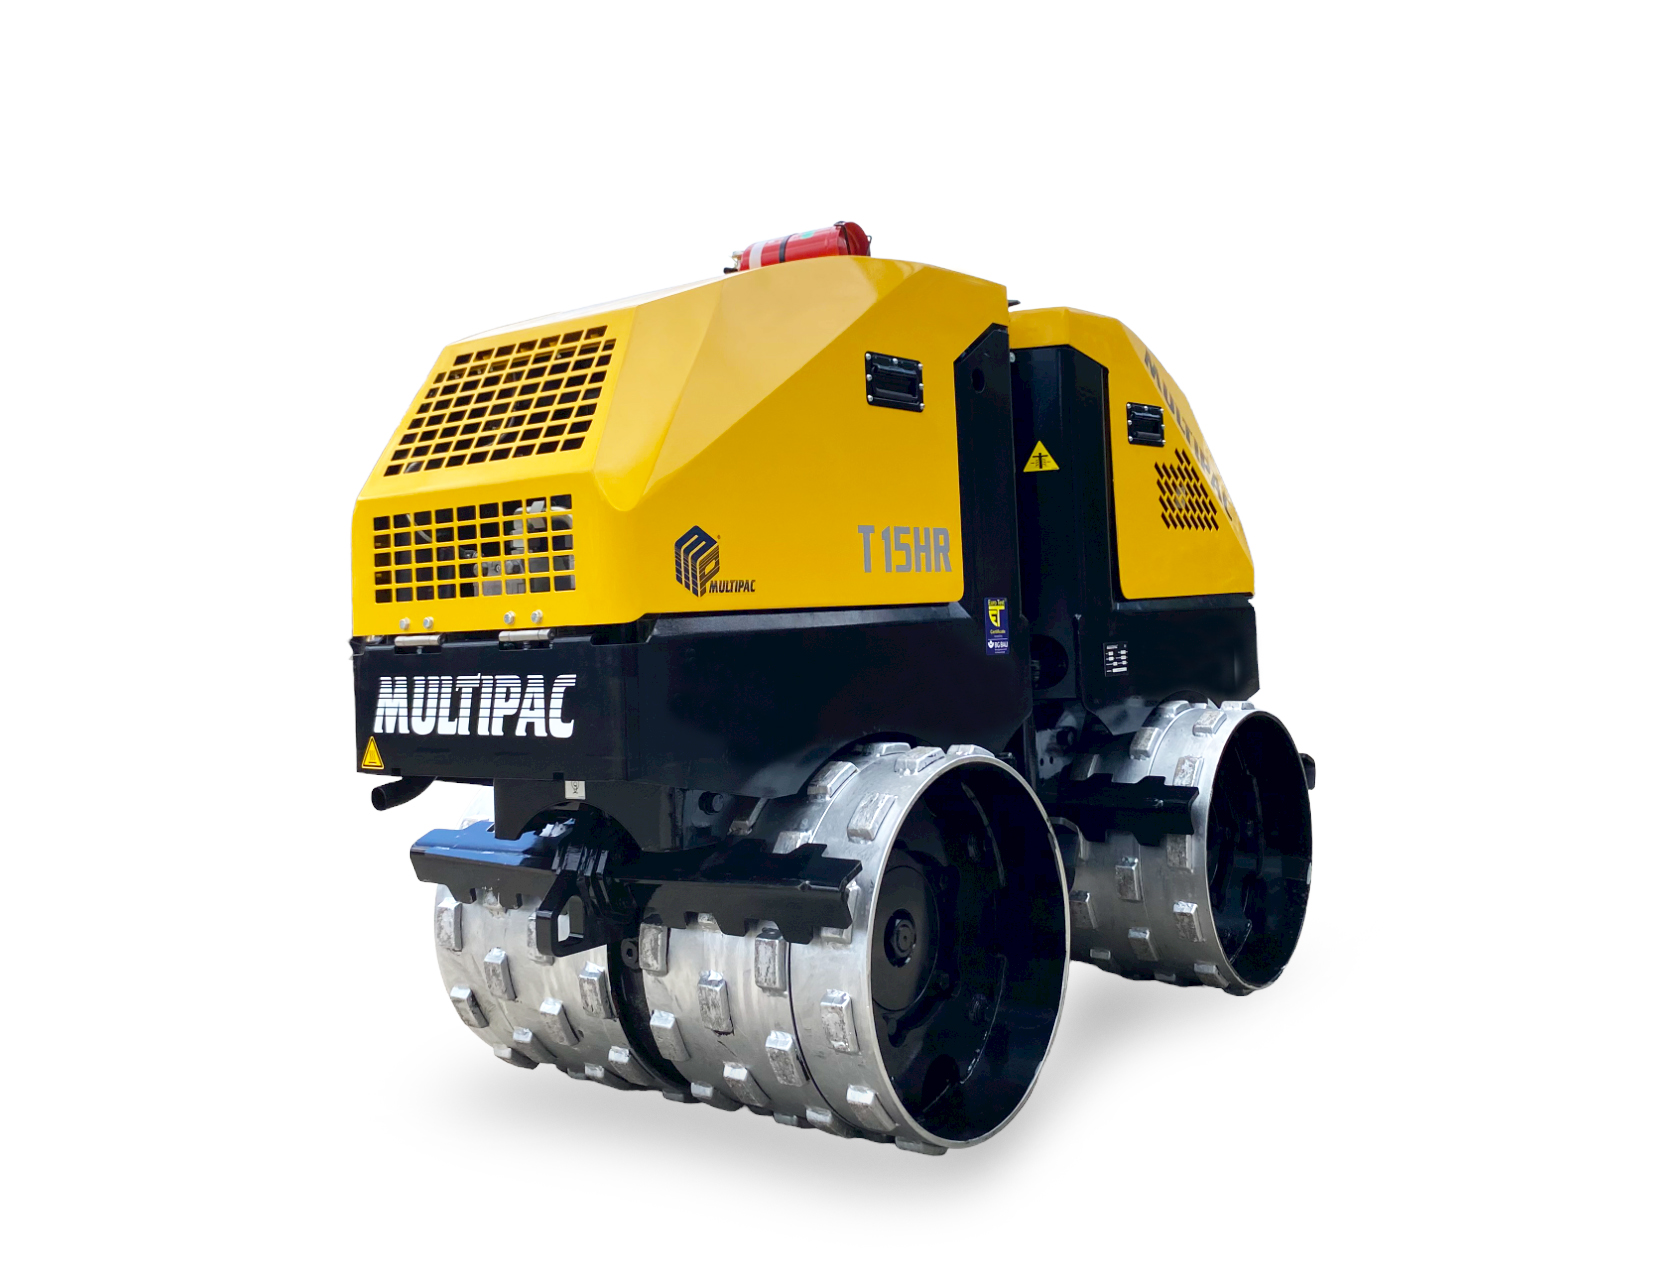 Multipac T15HR Trench Roller back